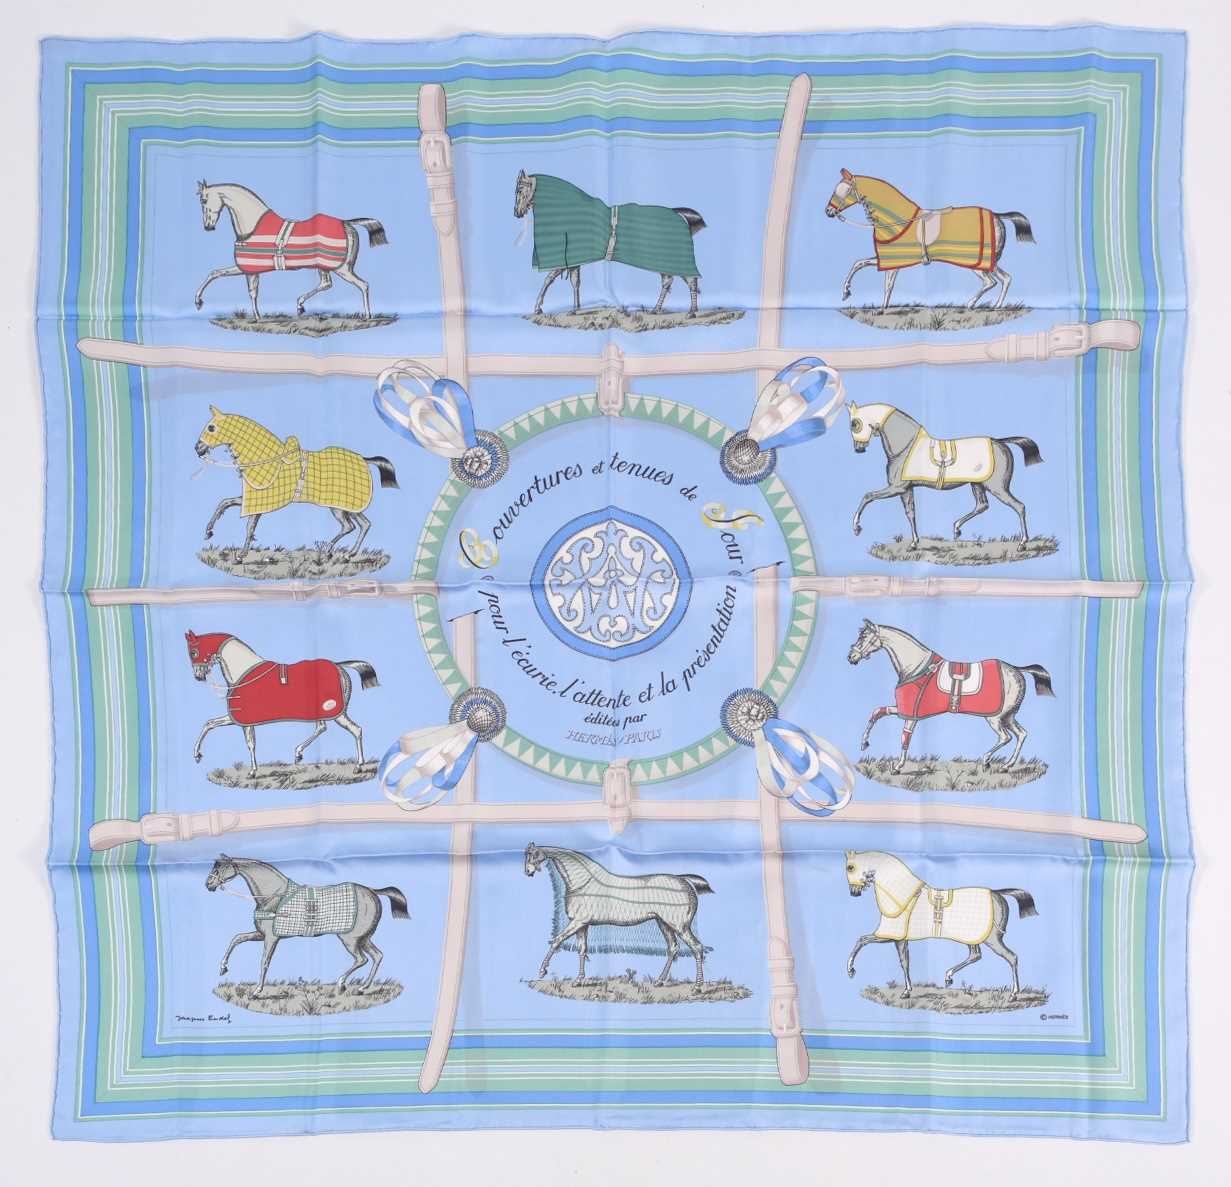 A Hermes silk square scarf printed with the "Guivreries" pattern, together with two other Hermes